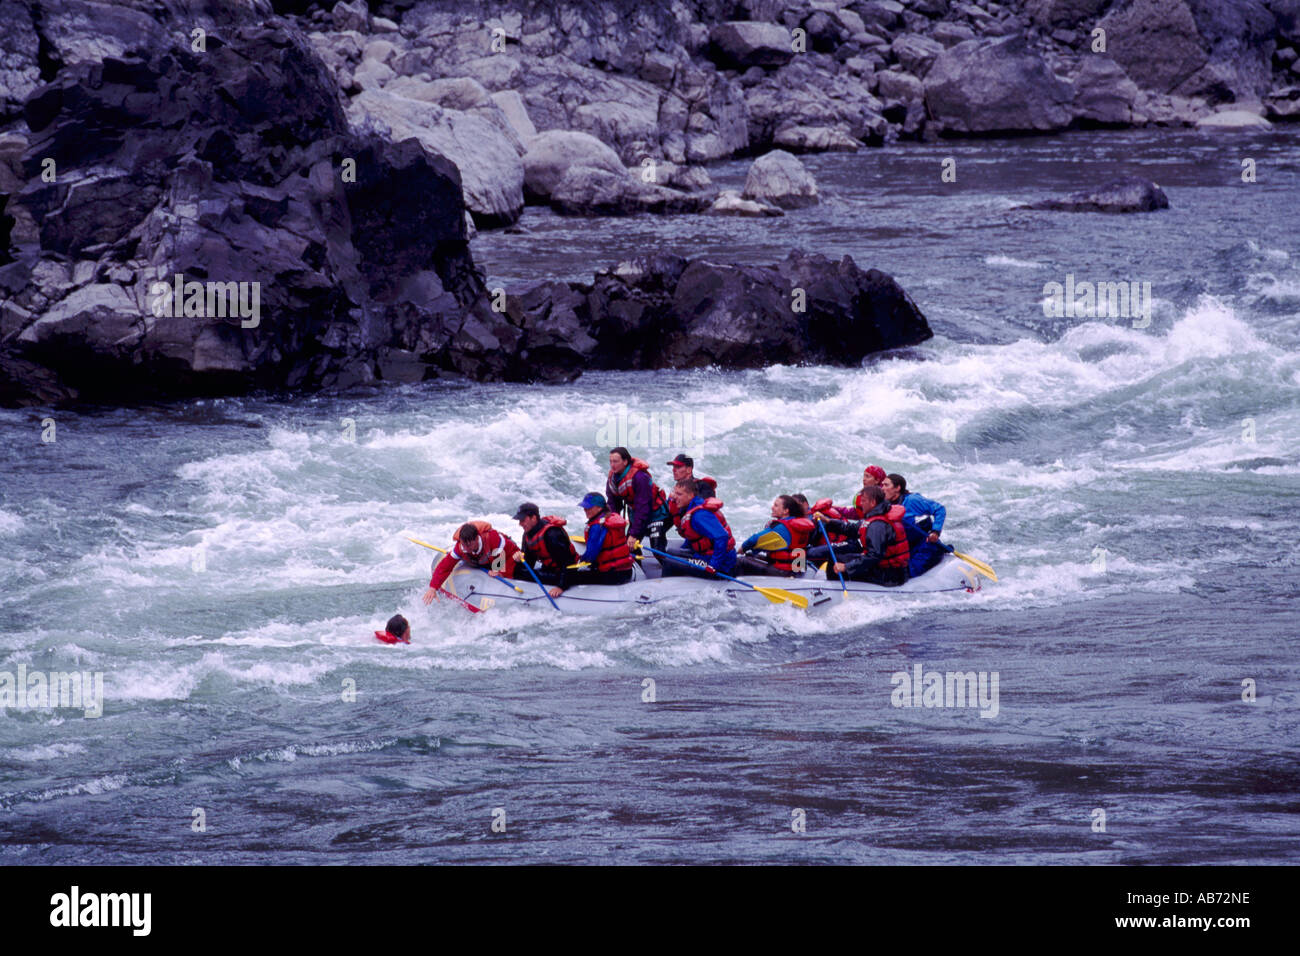 Thompson River near Lytton, BC, British Columbia, Canada - Man overboard in White Water / Whitewater Rafting Accident Stock Photo